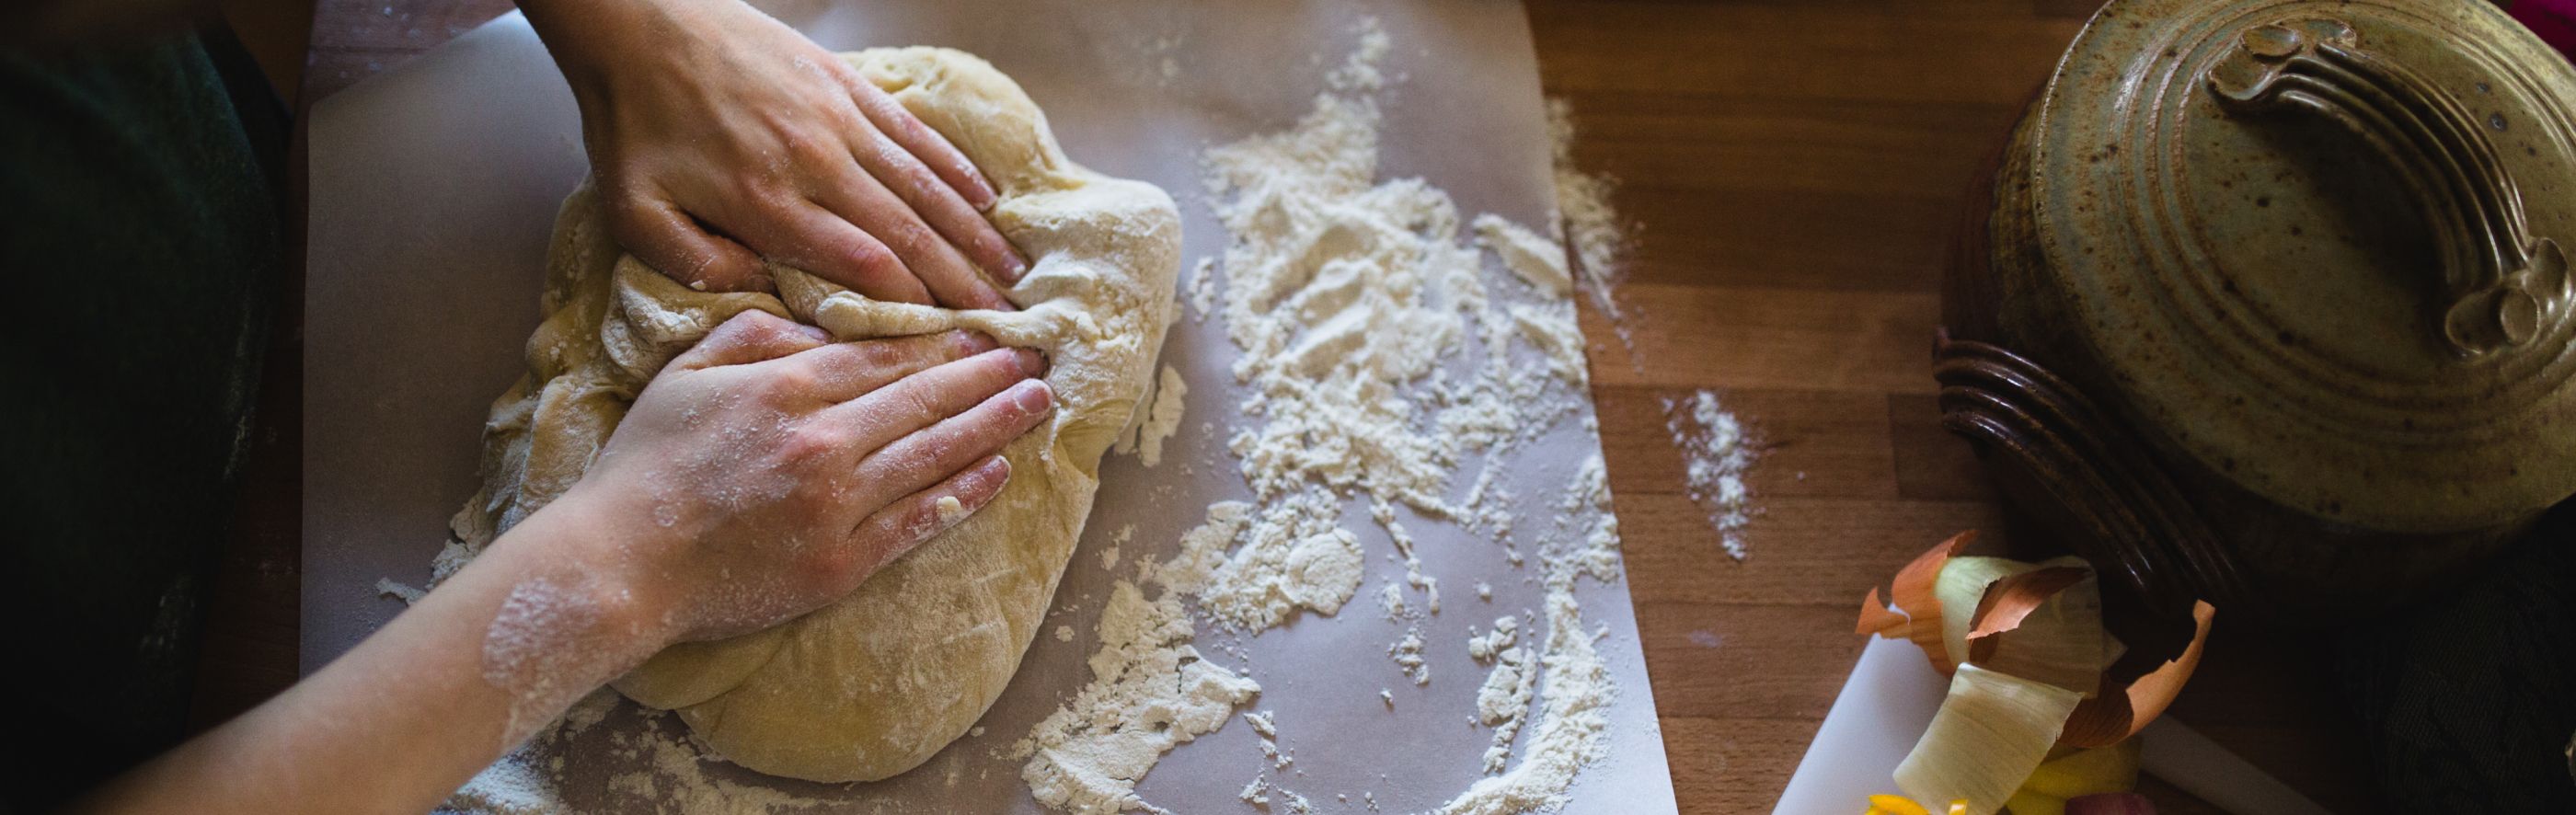 breadmaking-how-to-mix-and-knead-bread-dough-like-a-pro